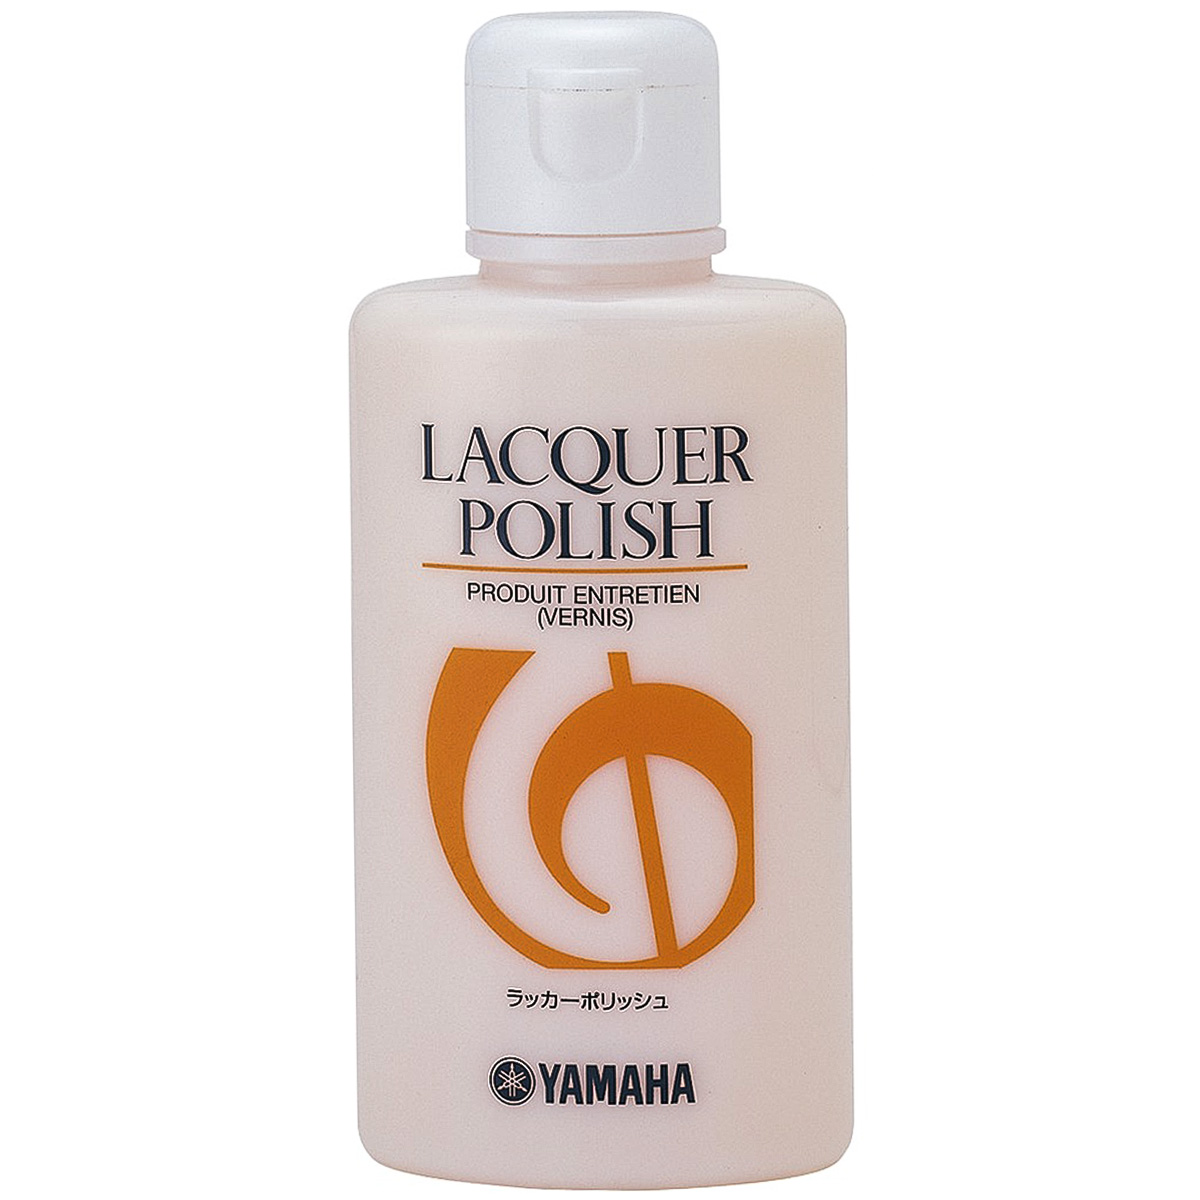 Yamaha YHLCPOL: Lacquer Polish ALP (Liquid) For Brass/Woodwind Instruments